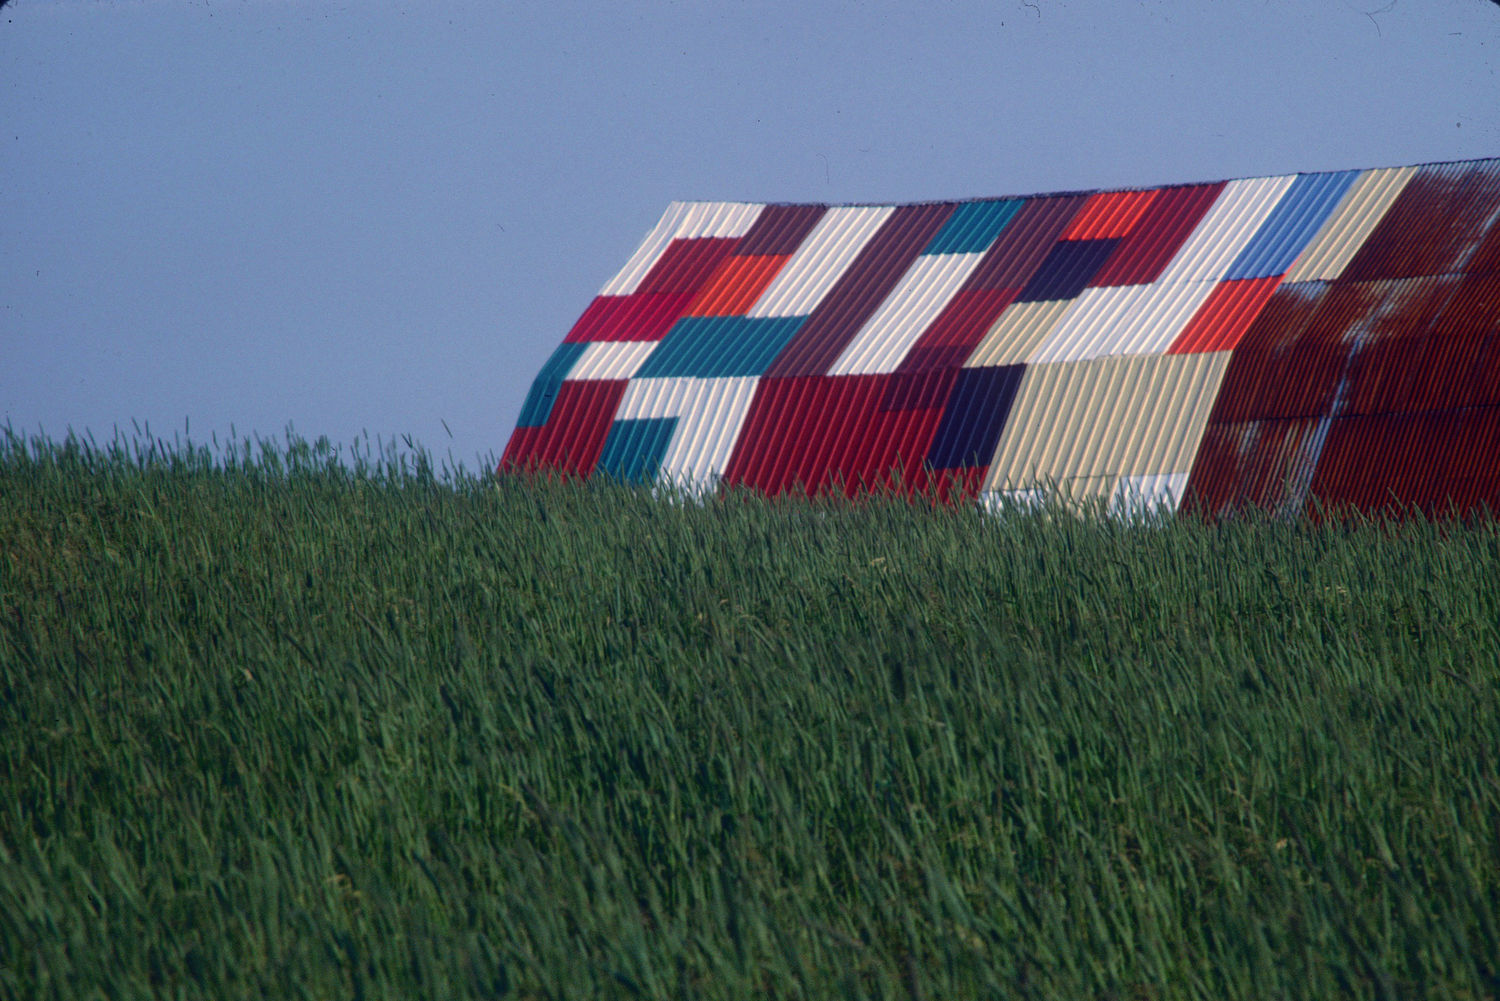 Colour photograph of a green field with in the background the roof of a building in sheet metal with multicolored parts.